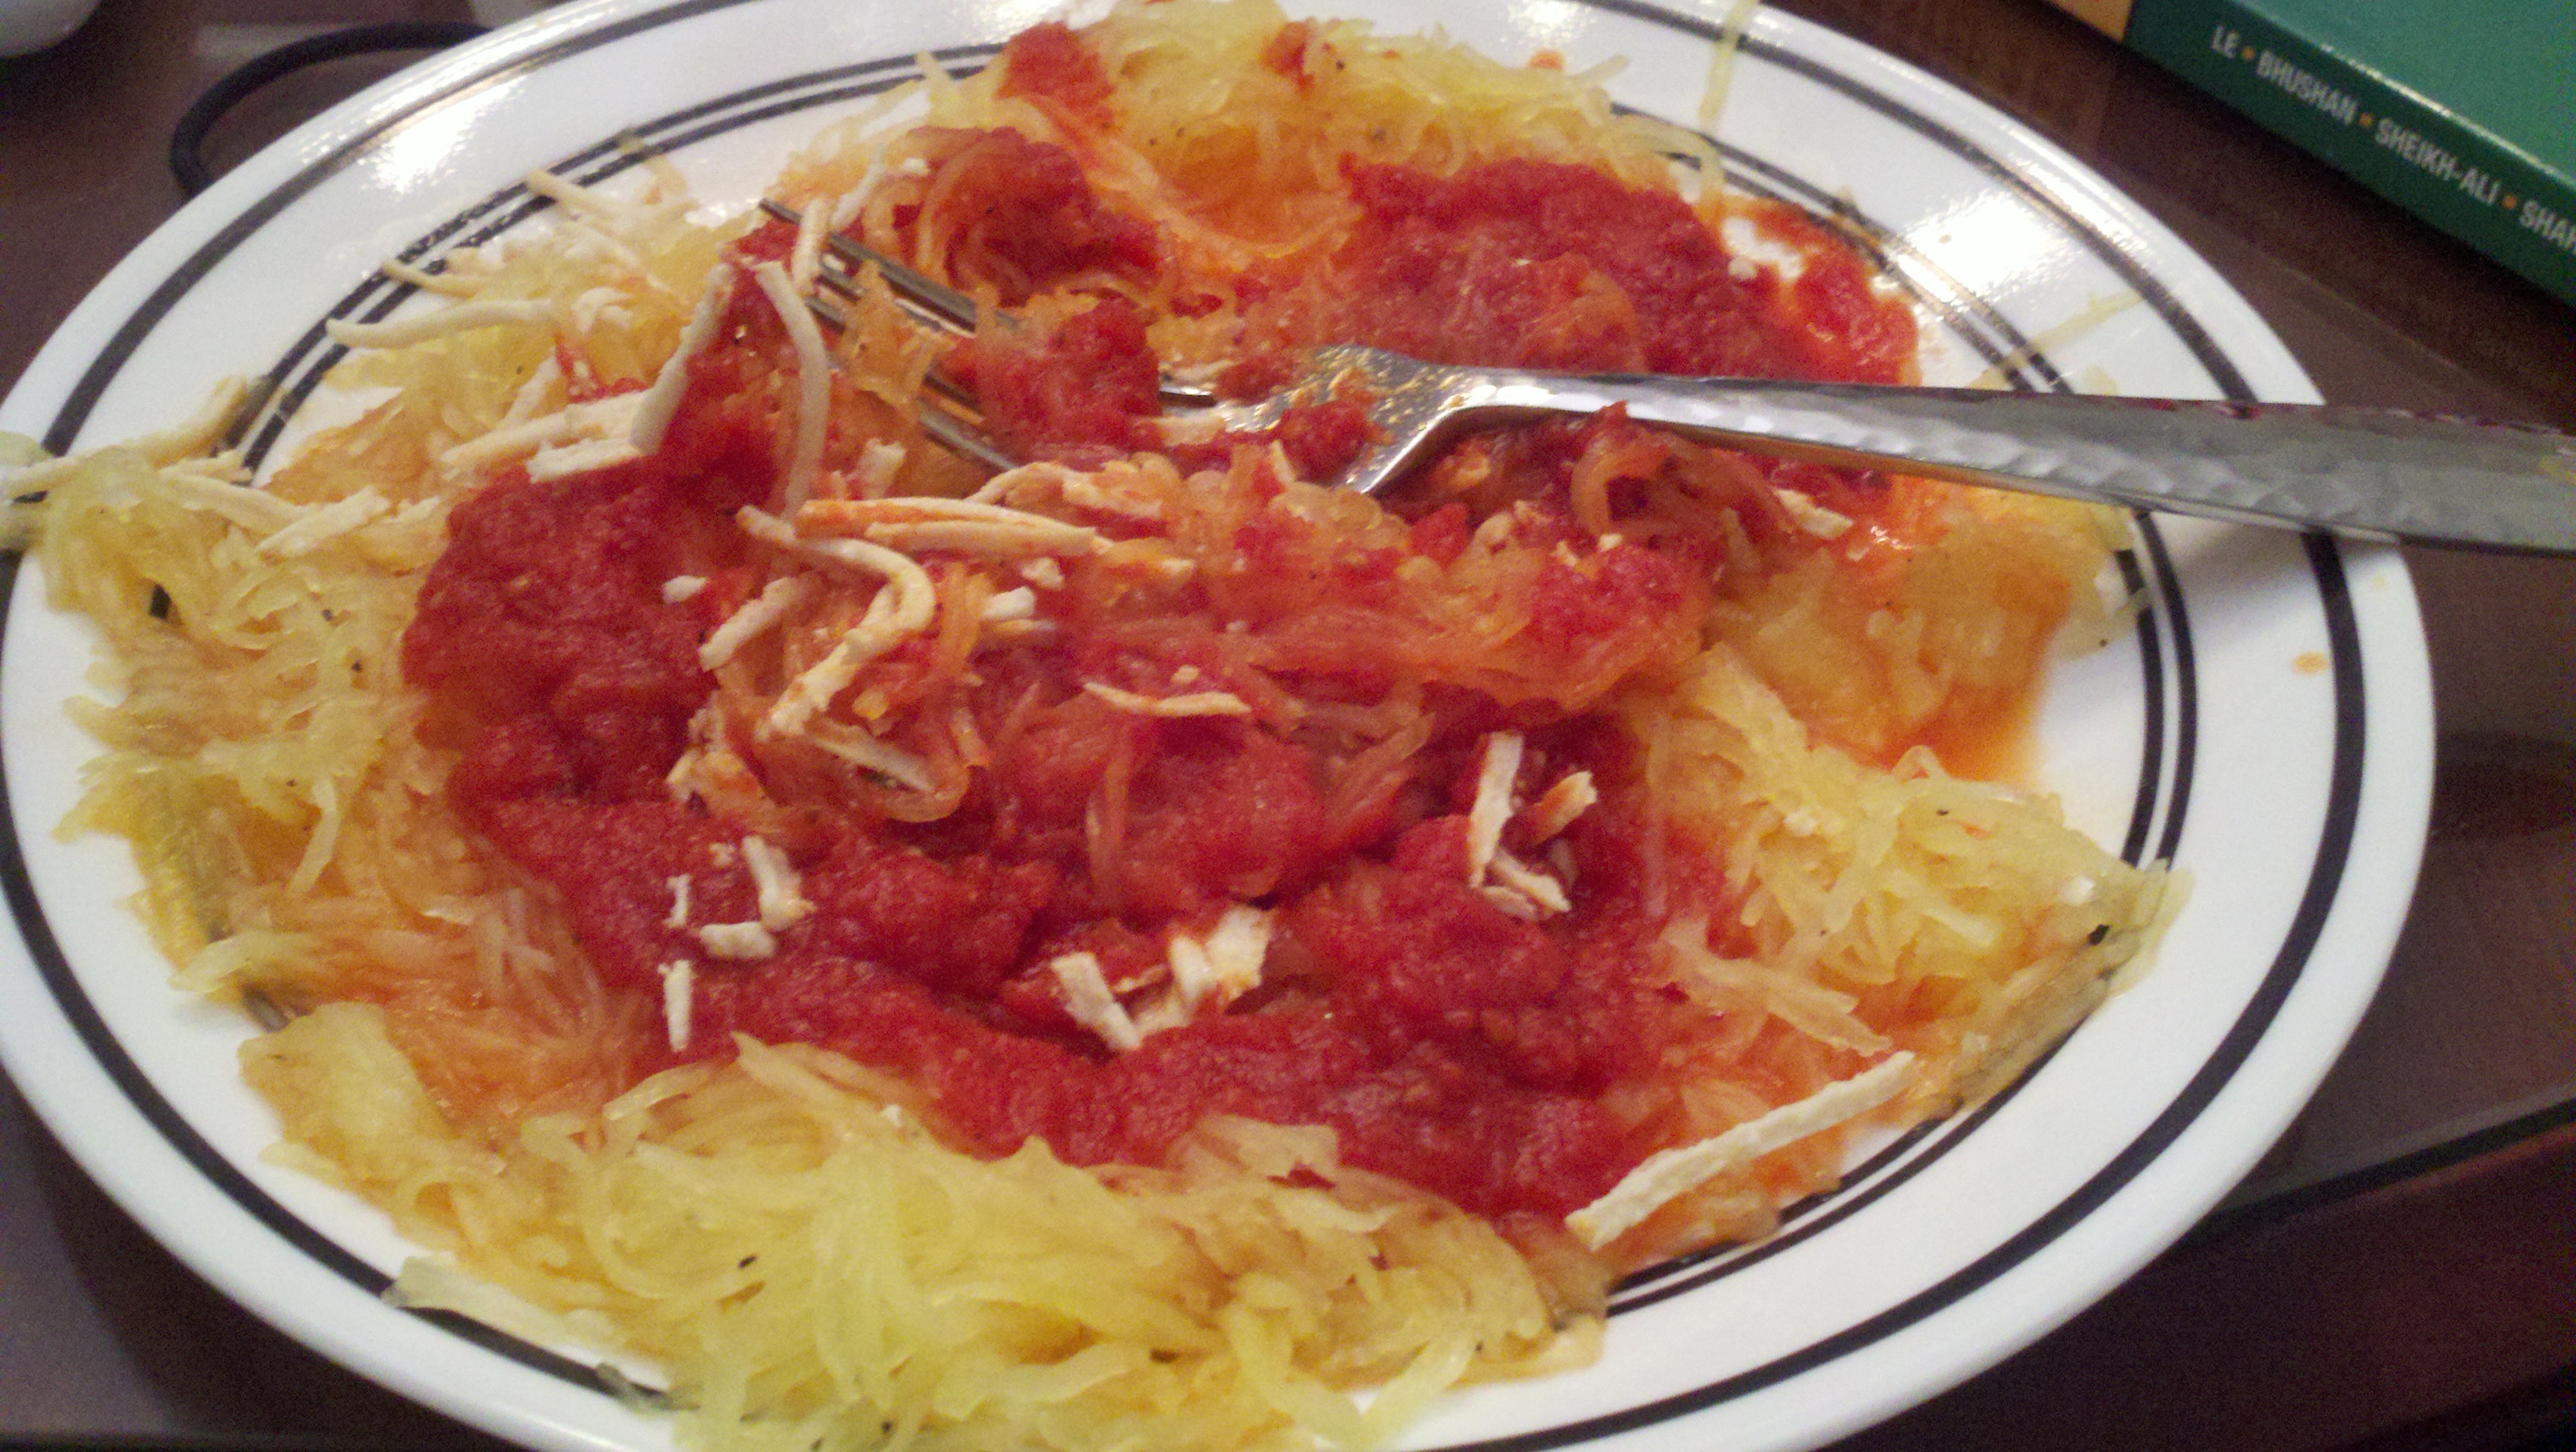 It’s Harvest Time! Try Some Spaghetti Squash for Dinner